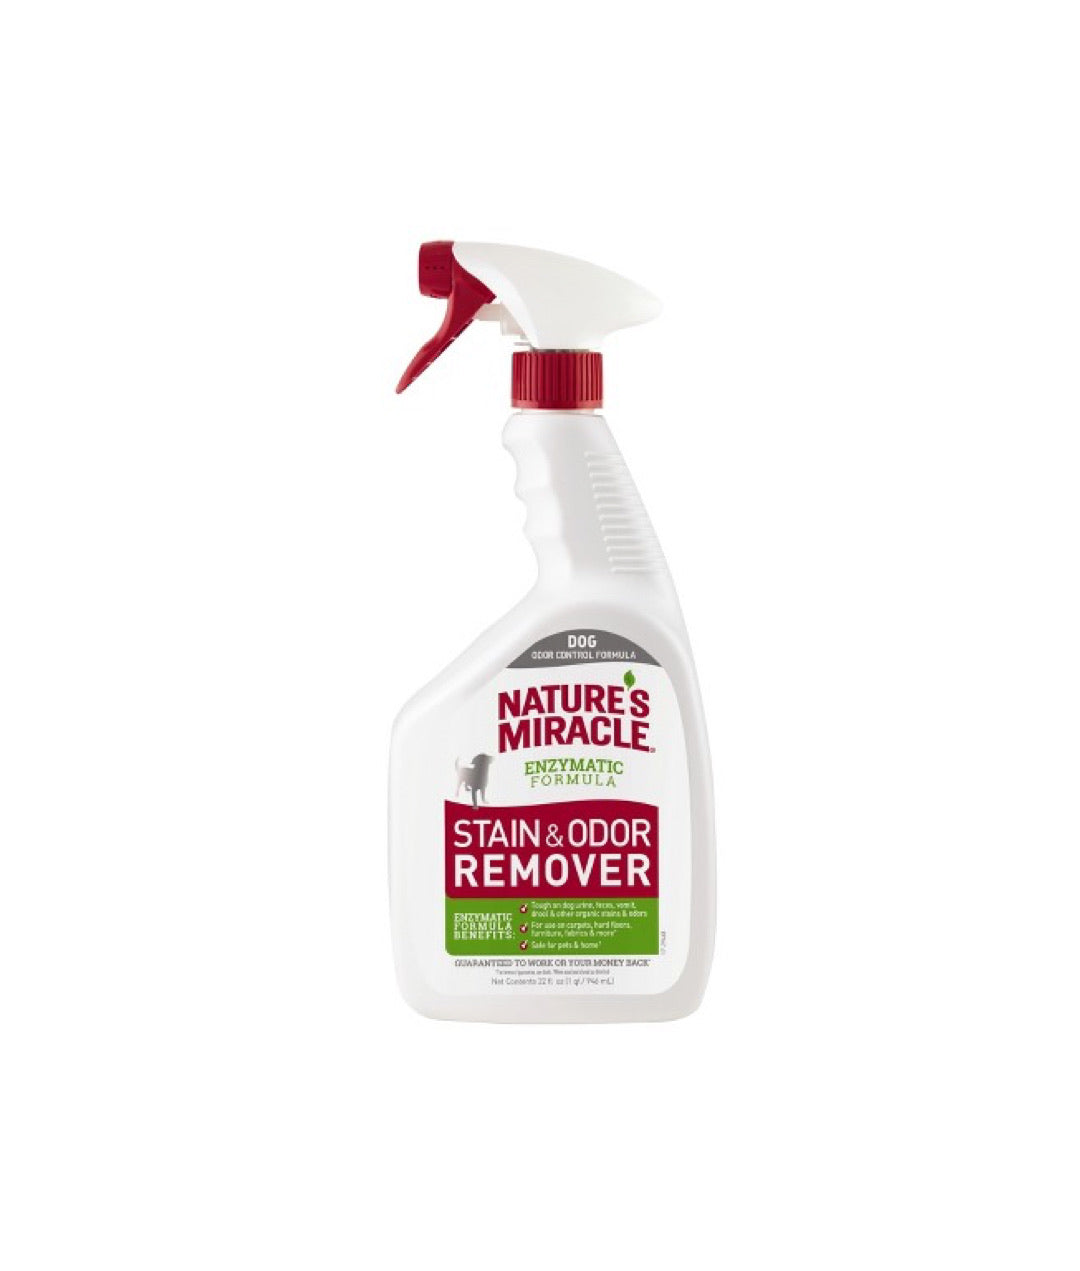 Nature’s Miracle Stain & Odor Remover (709ml)